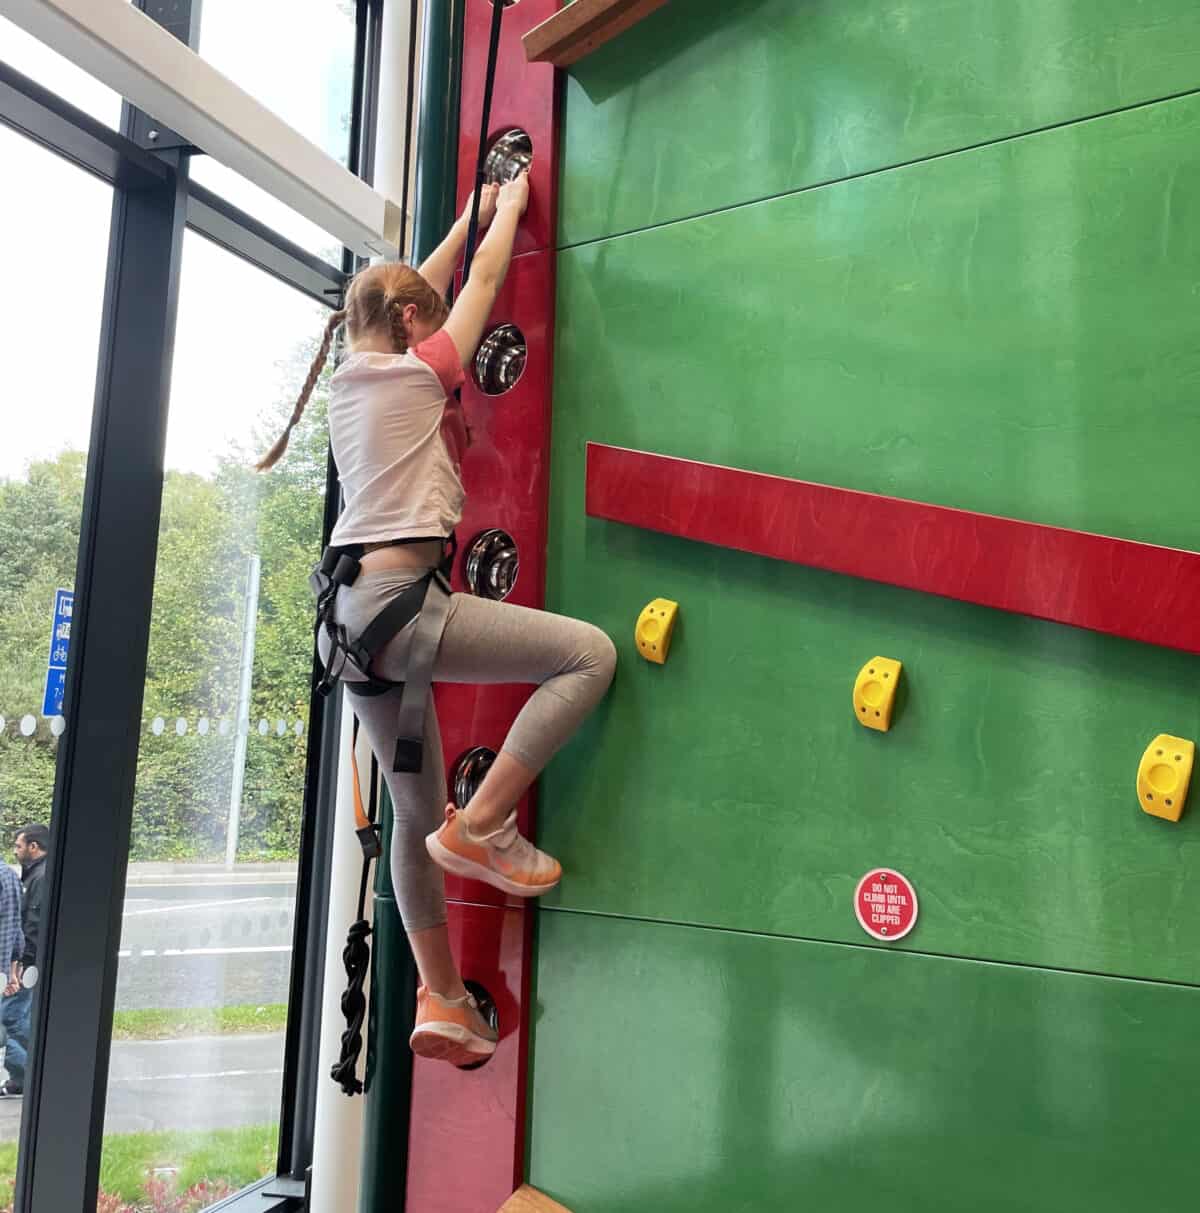 Clip n Climb at Places Leisure - Camberley, Surrey